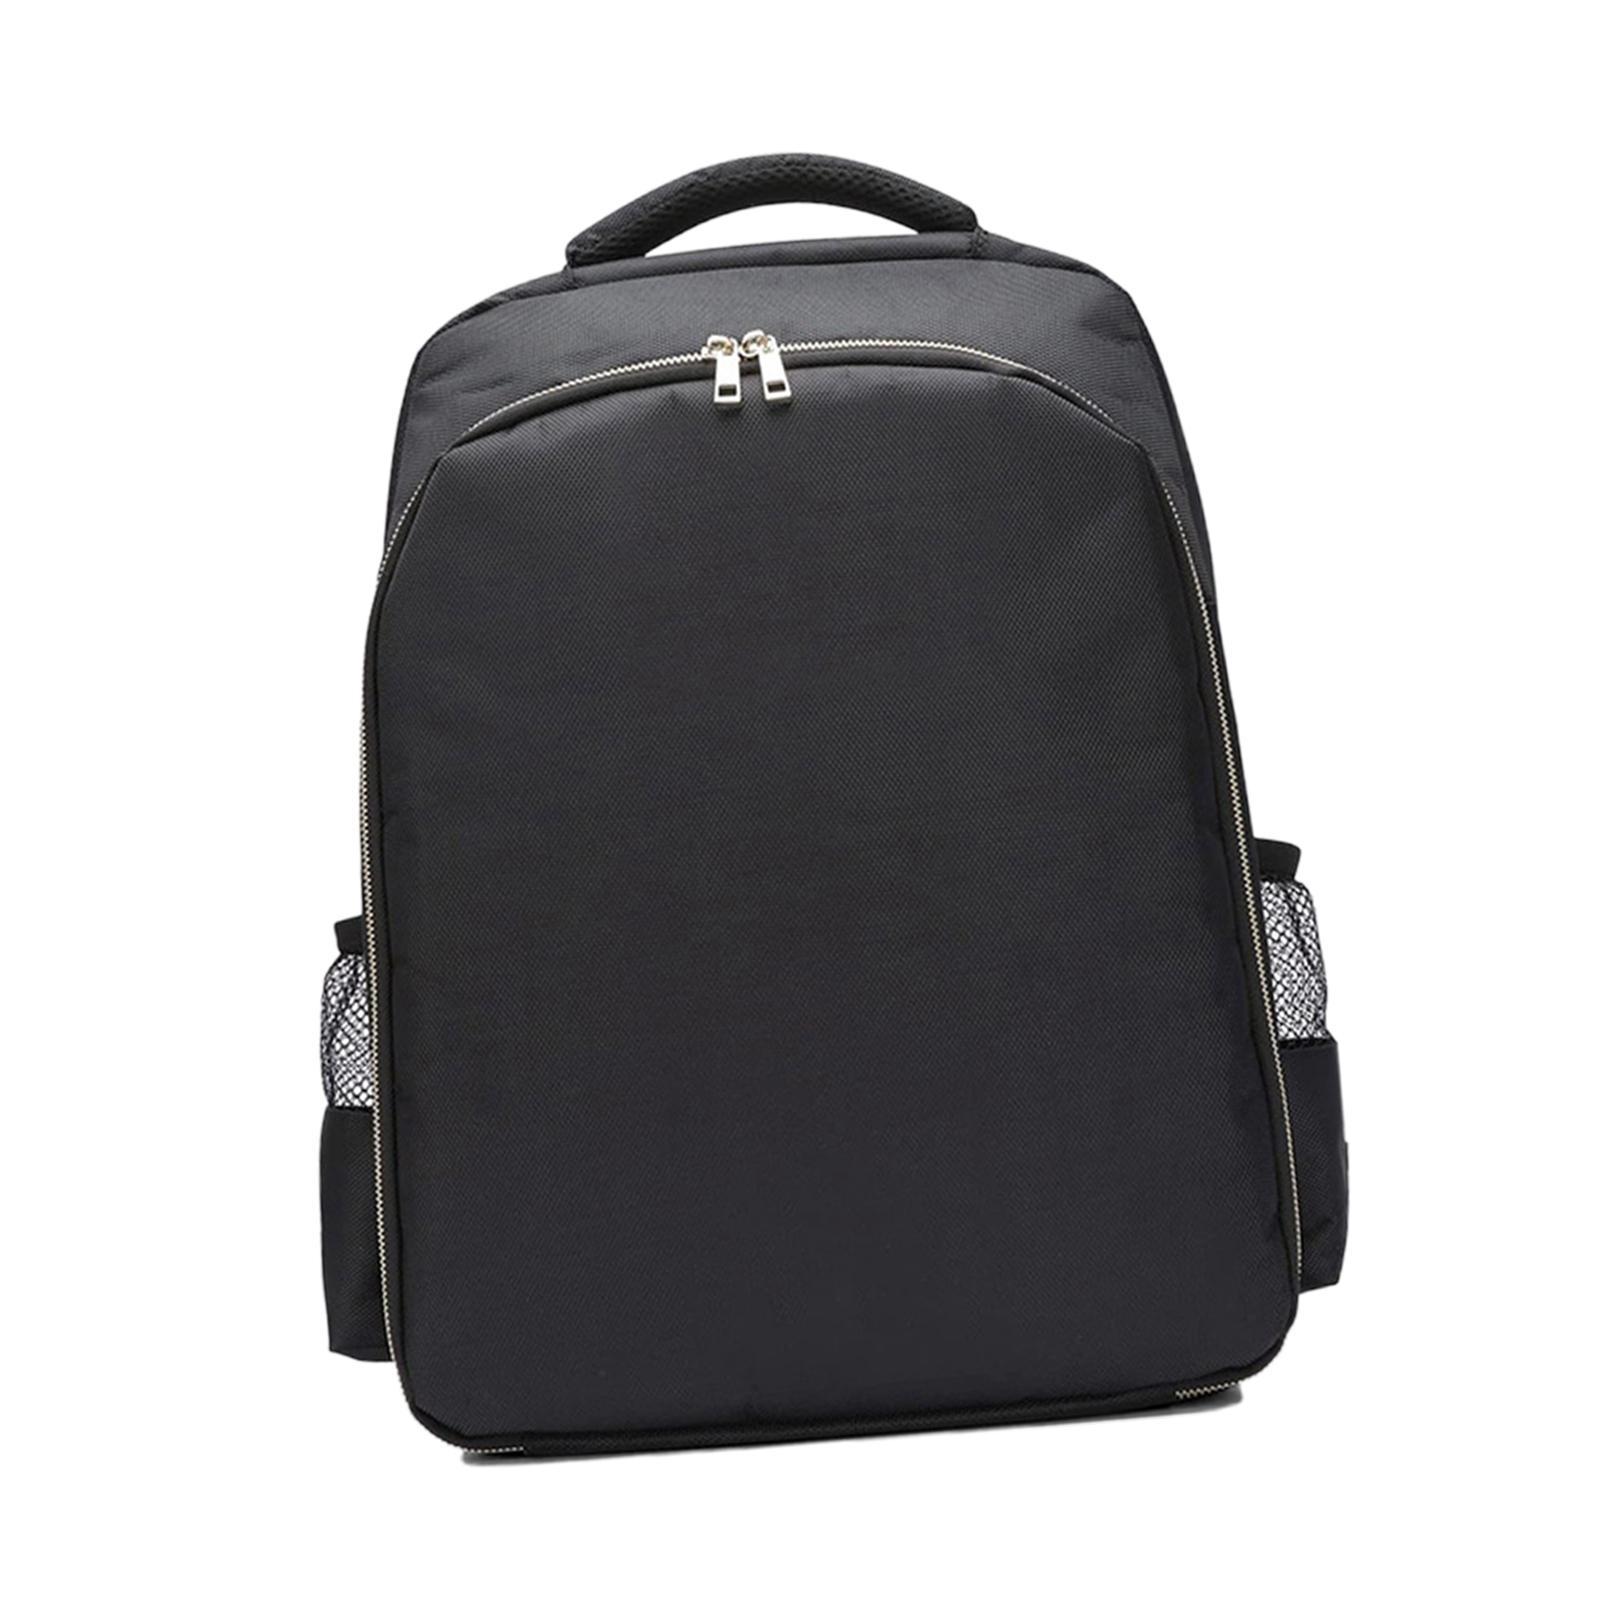 Backpack Bag for Barbers Large Capacity Oxford Cloth for Hairdresser Travel